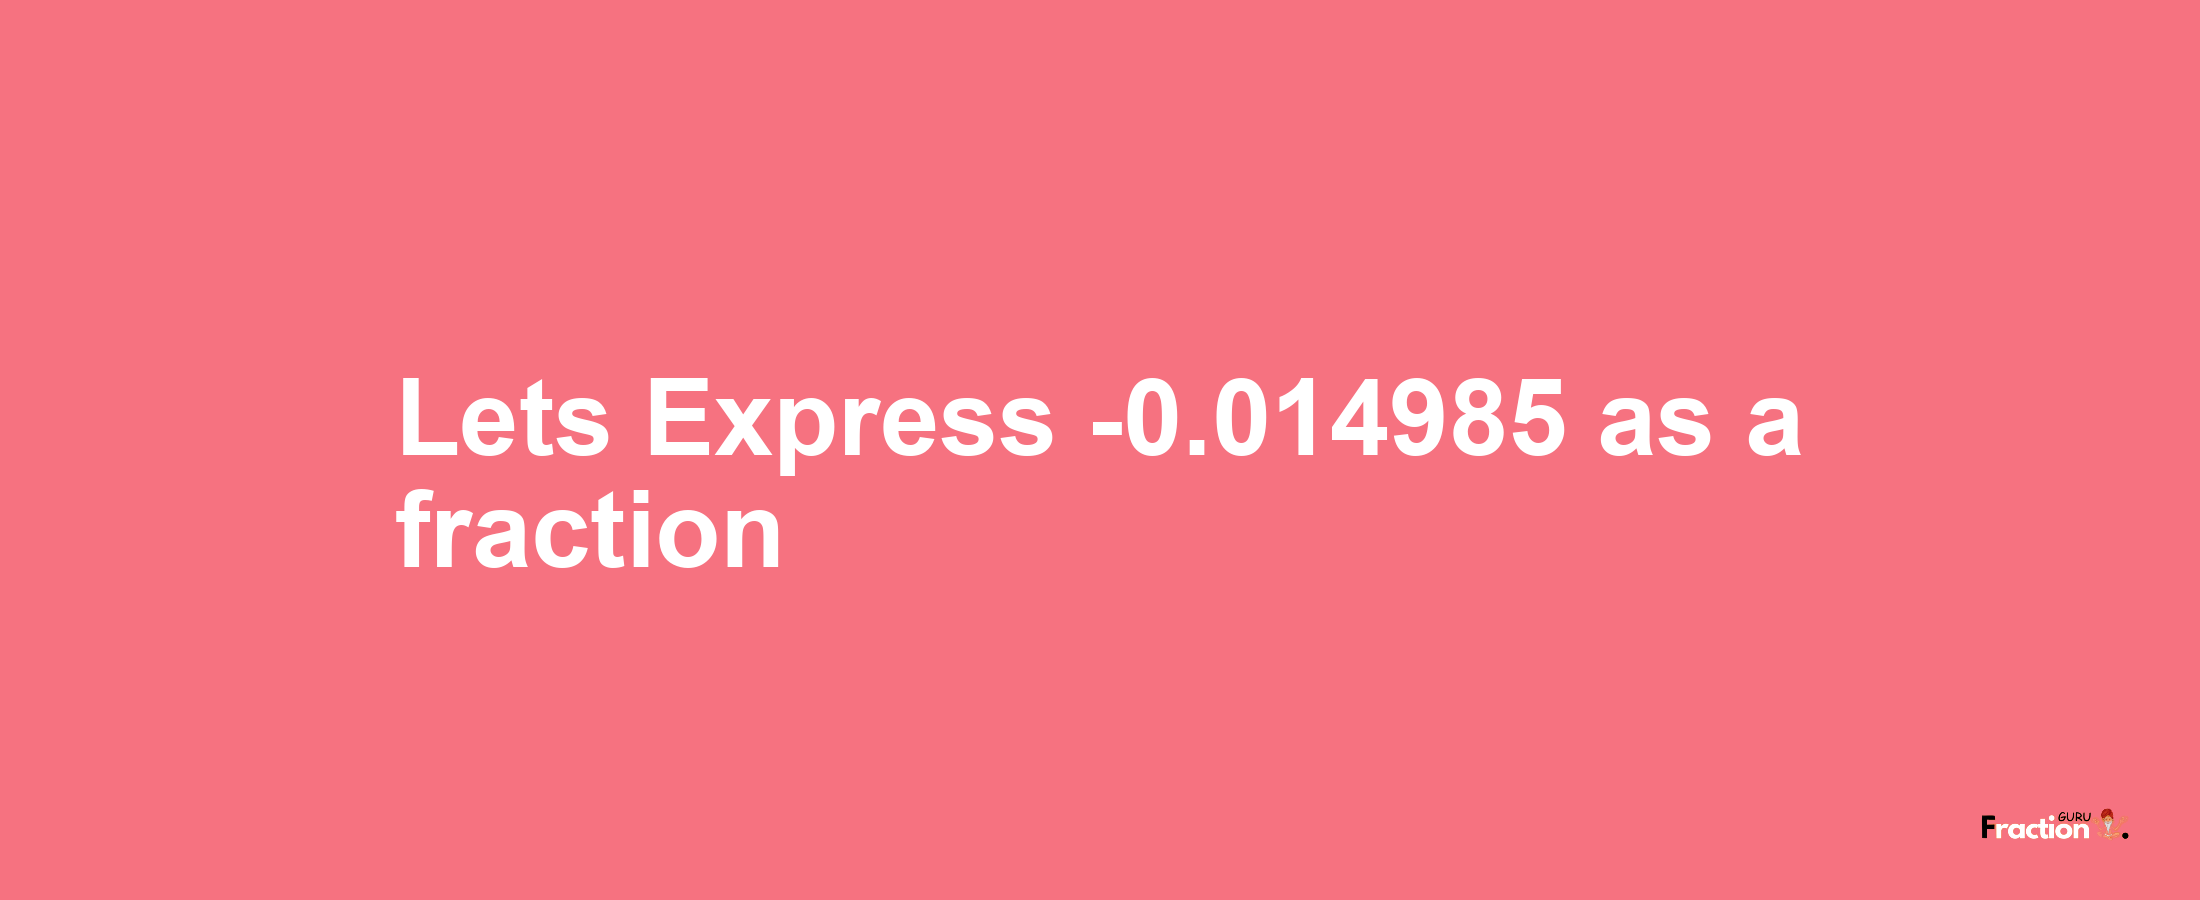 Lets Express -0.014985 as afraction